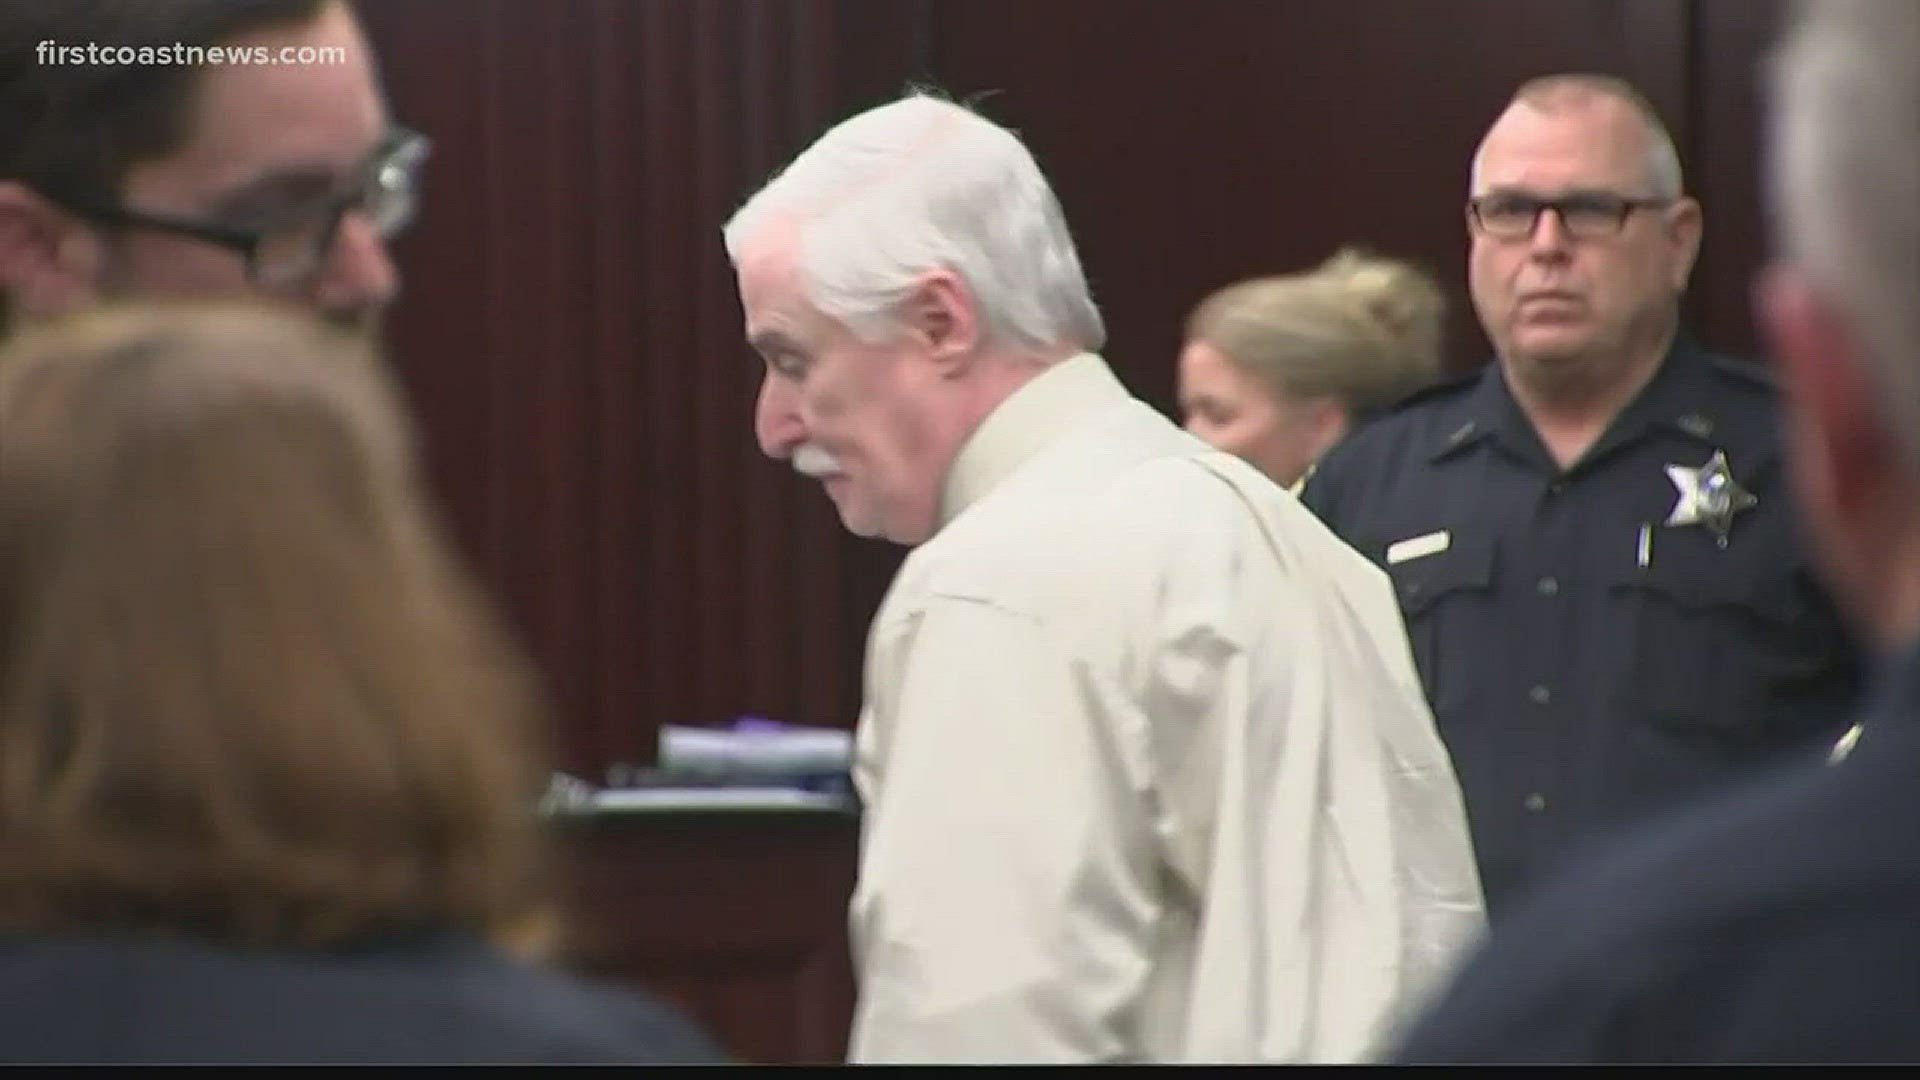 Donald Smith has already been found guilty of kidnapping, raping and killing 8-year-old Cherish Perrywinkle. The next step for the jury is a punishment sentence.